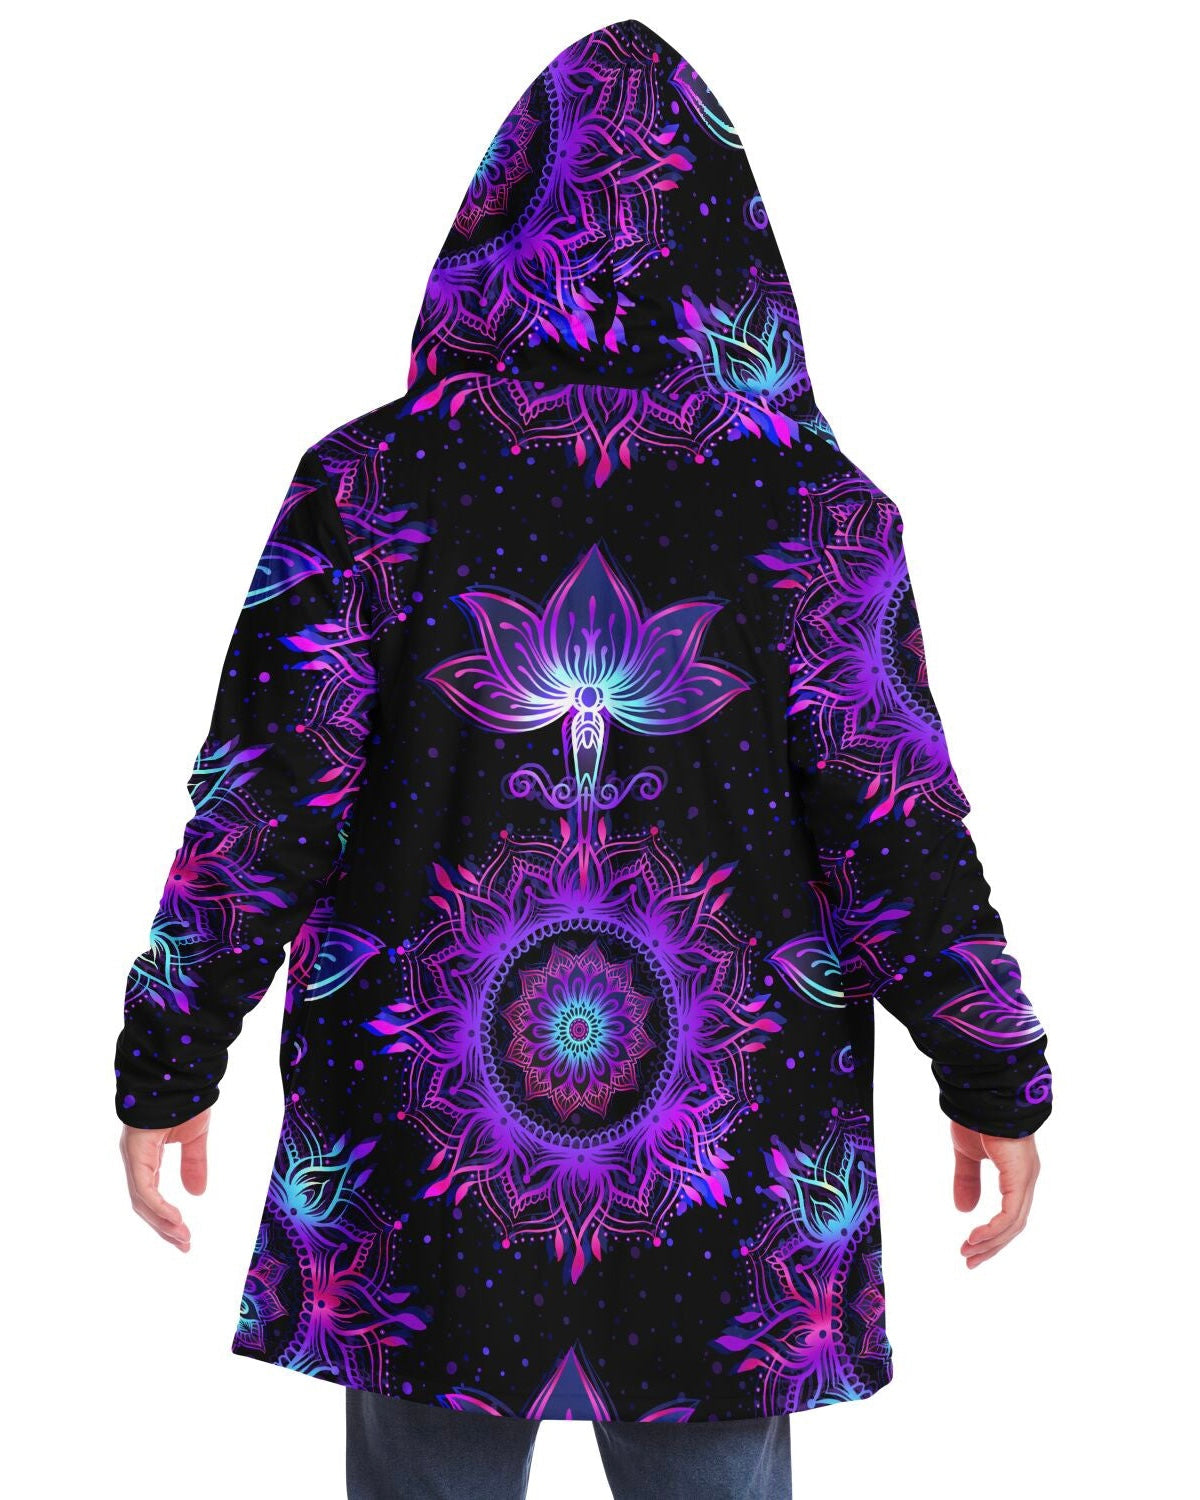 Back view of the model in the Starlight Mandala Cloak with hands down, presenting the design naturally.